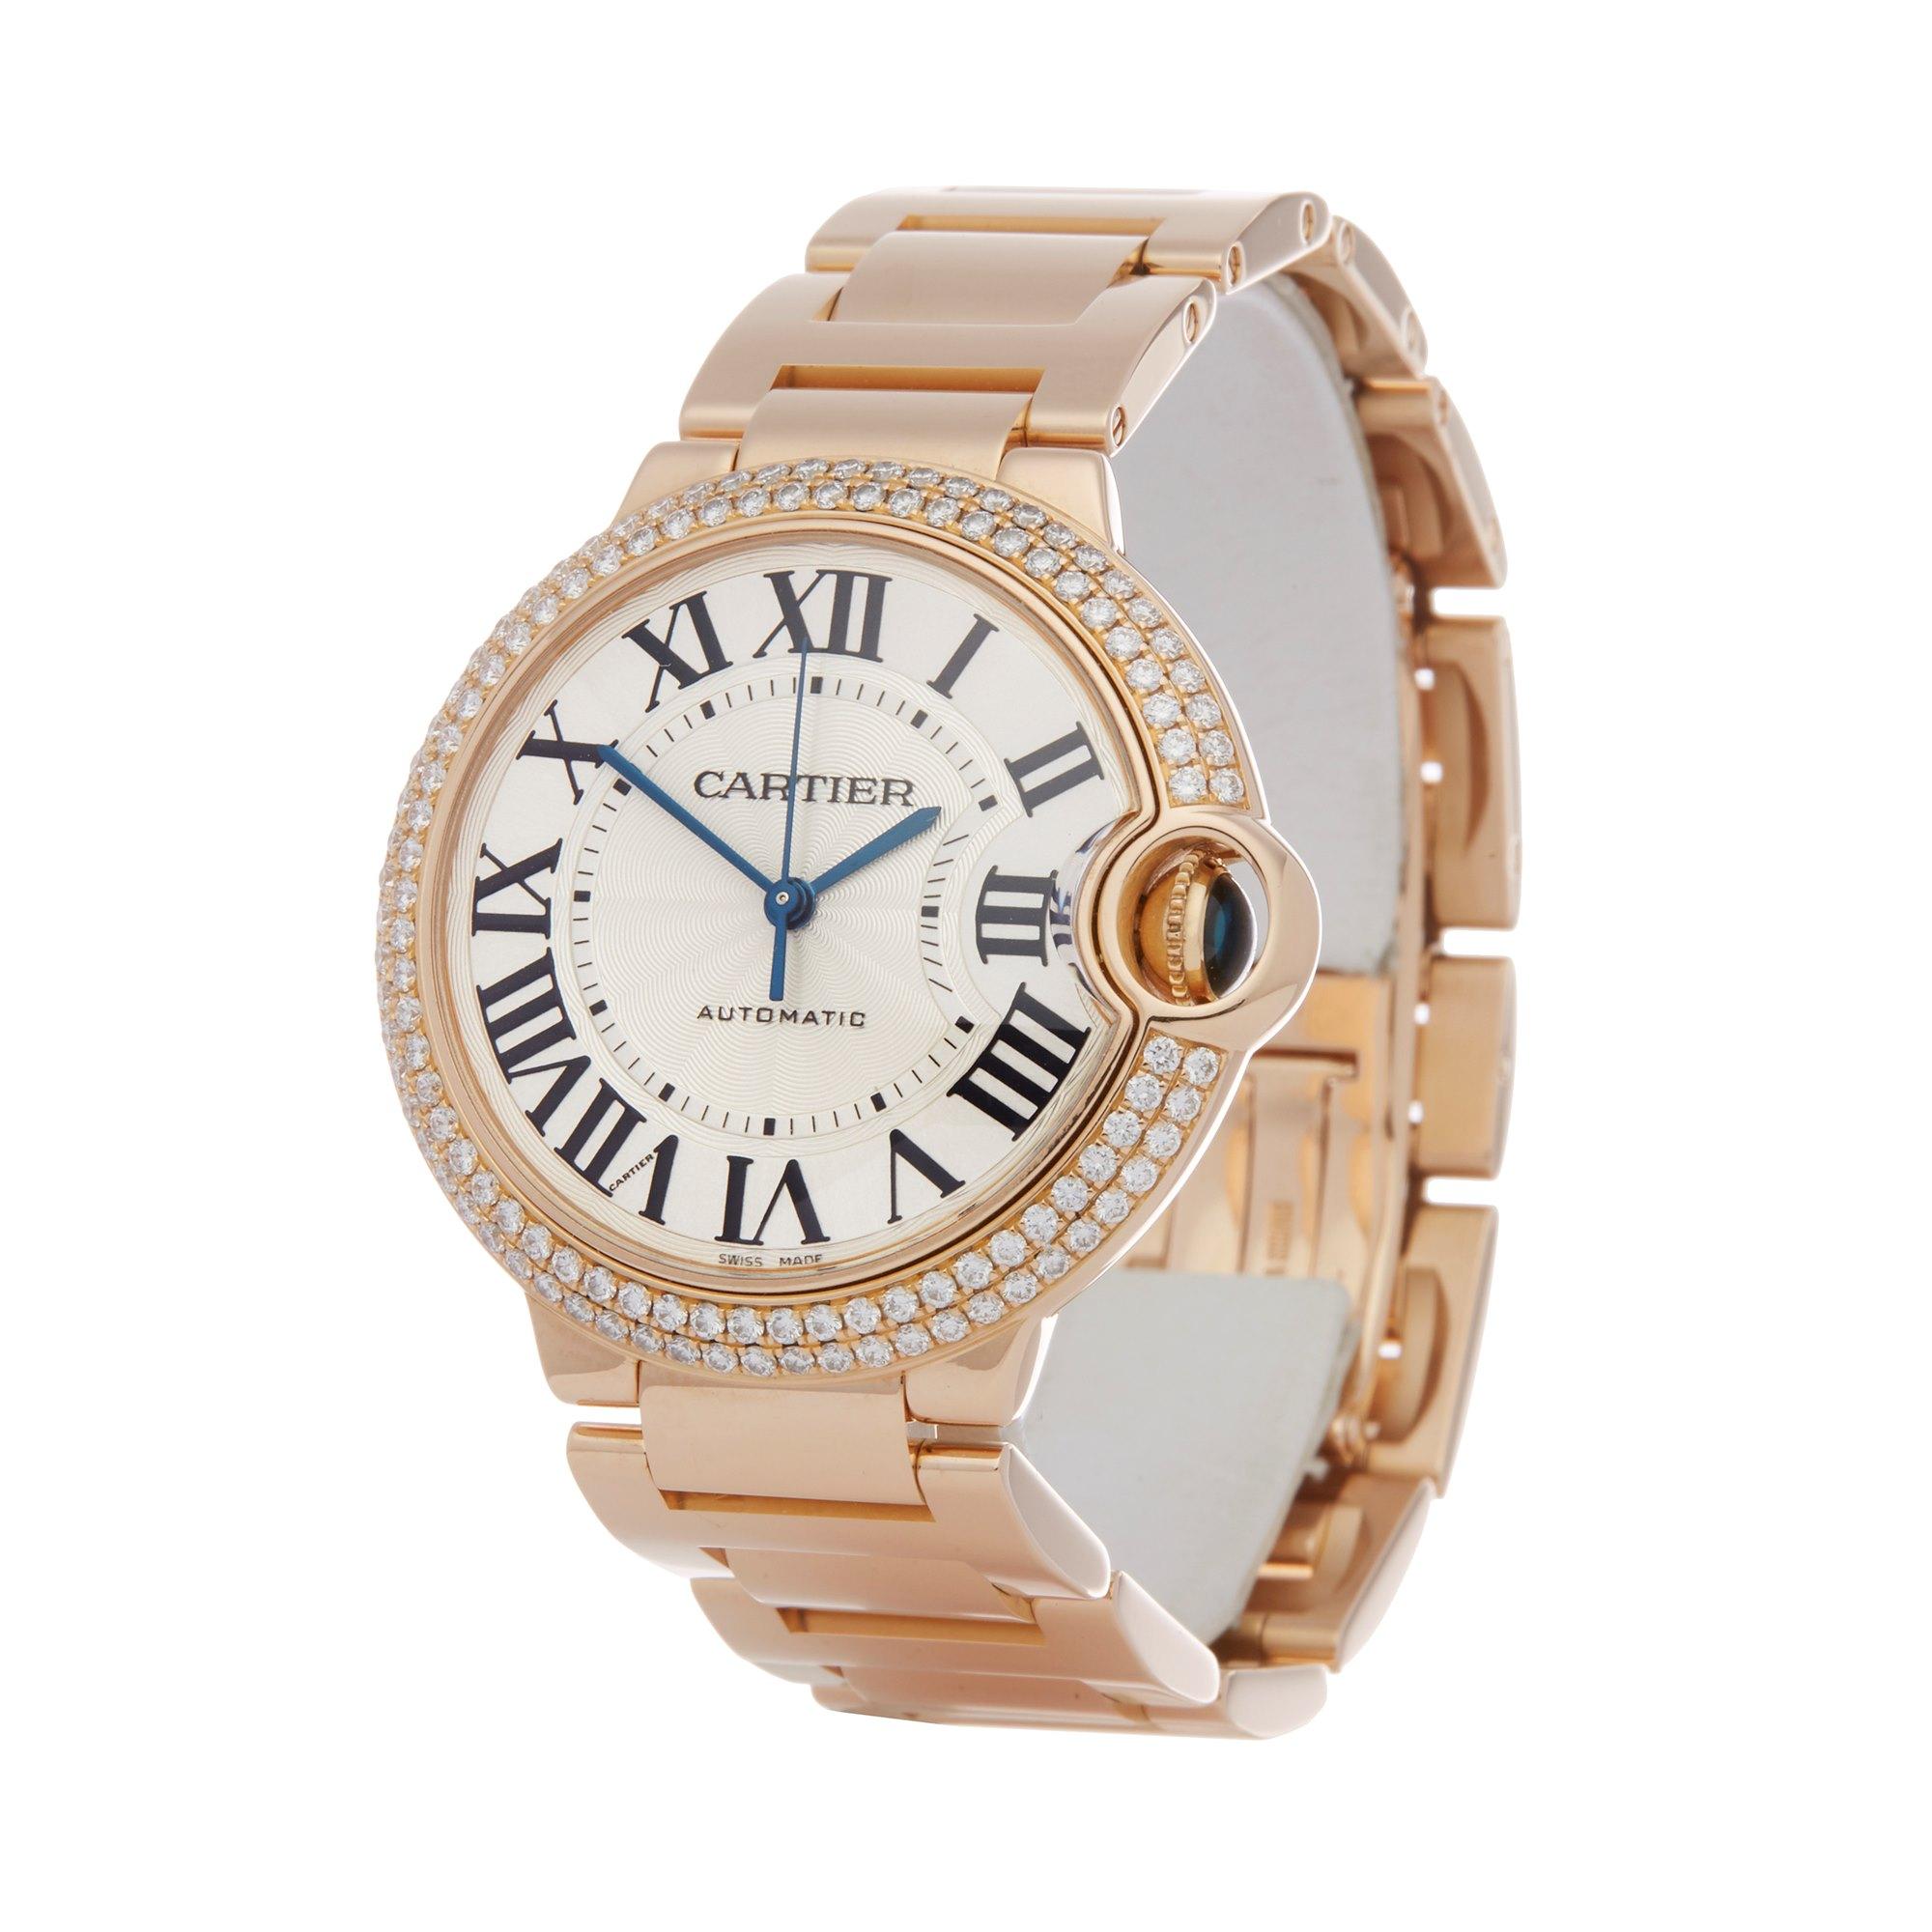 Xupes Reference: W007490
Manufacturer: Cartier
Model: Ballon Bleu
Model Variant: 36
Model Number: WJBB0005 or 3003
Age: 2009
Gender: Ladies
Complete With: Cartier Box, Manual, Booklet & Guarantee
Dial: Silver Roman
Glass: Sapphire Crystal
Case Size: